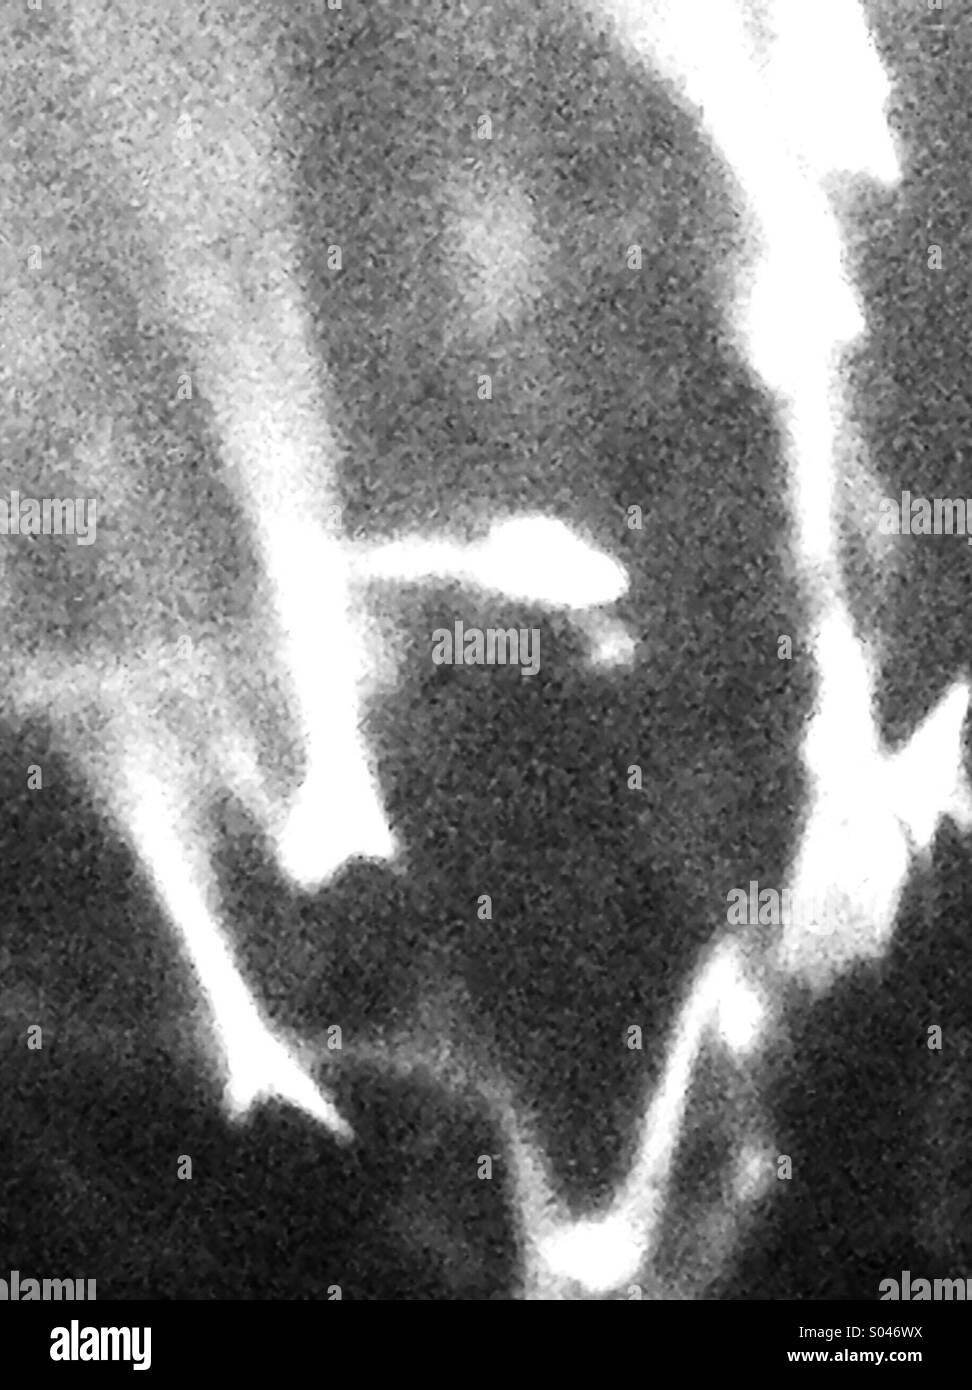 Black and white grainy closeup of reflections generated by lights on a sparkling stage backdrop Stock Photo